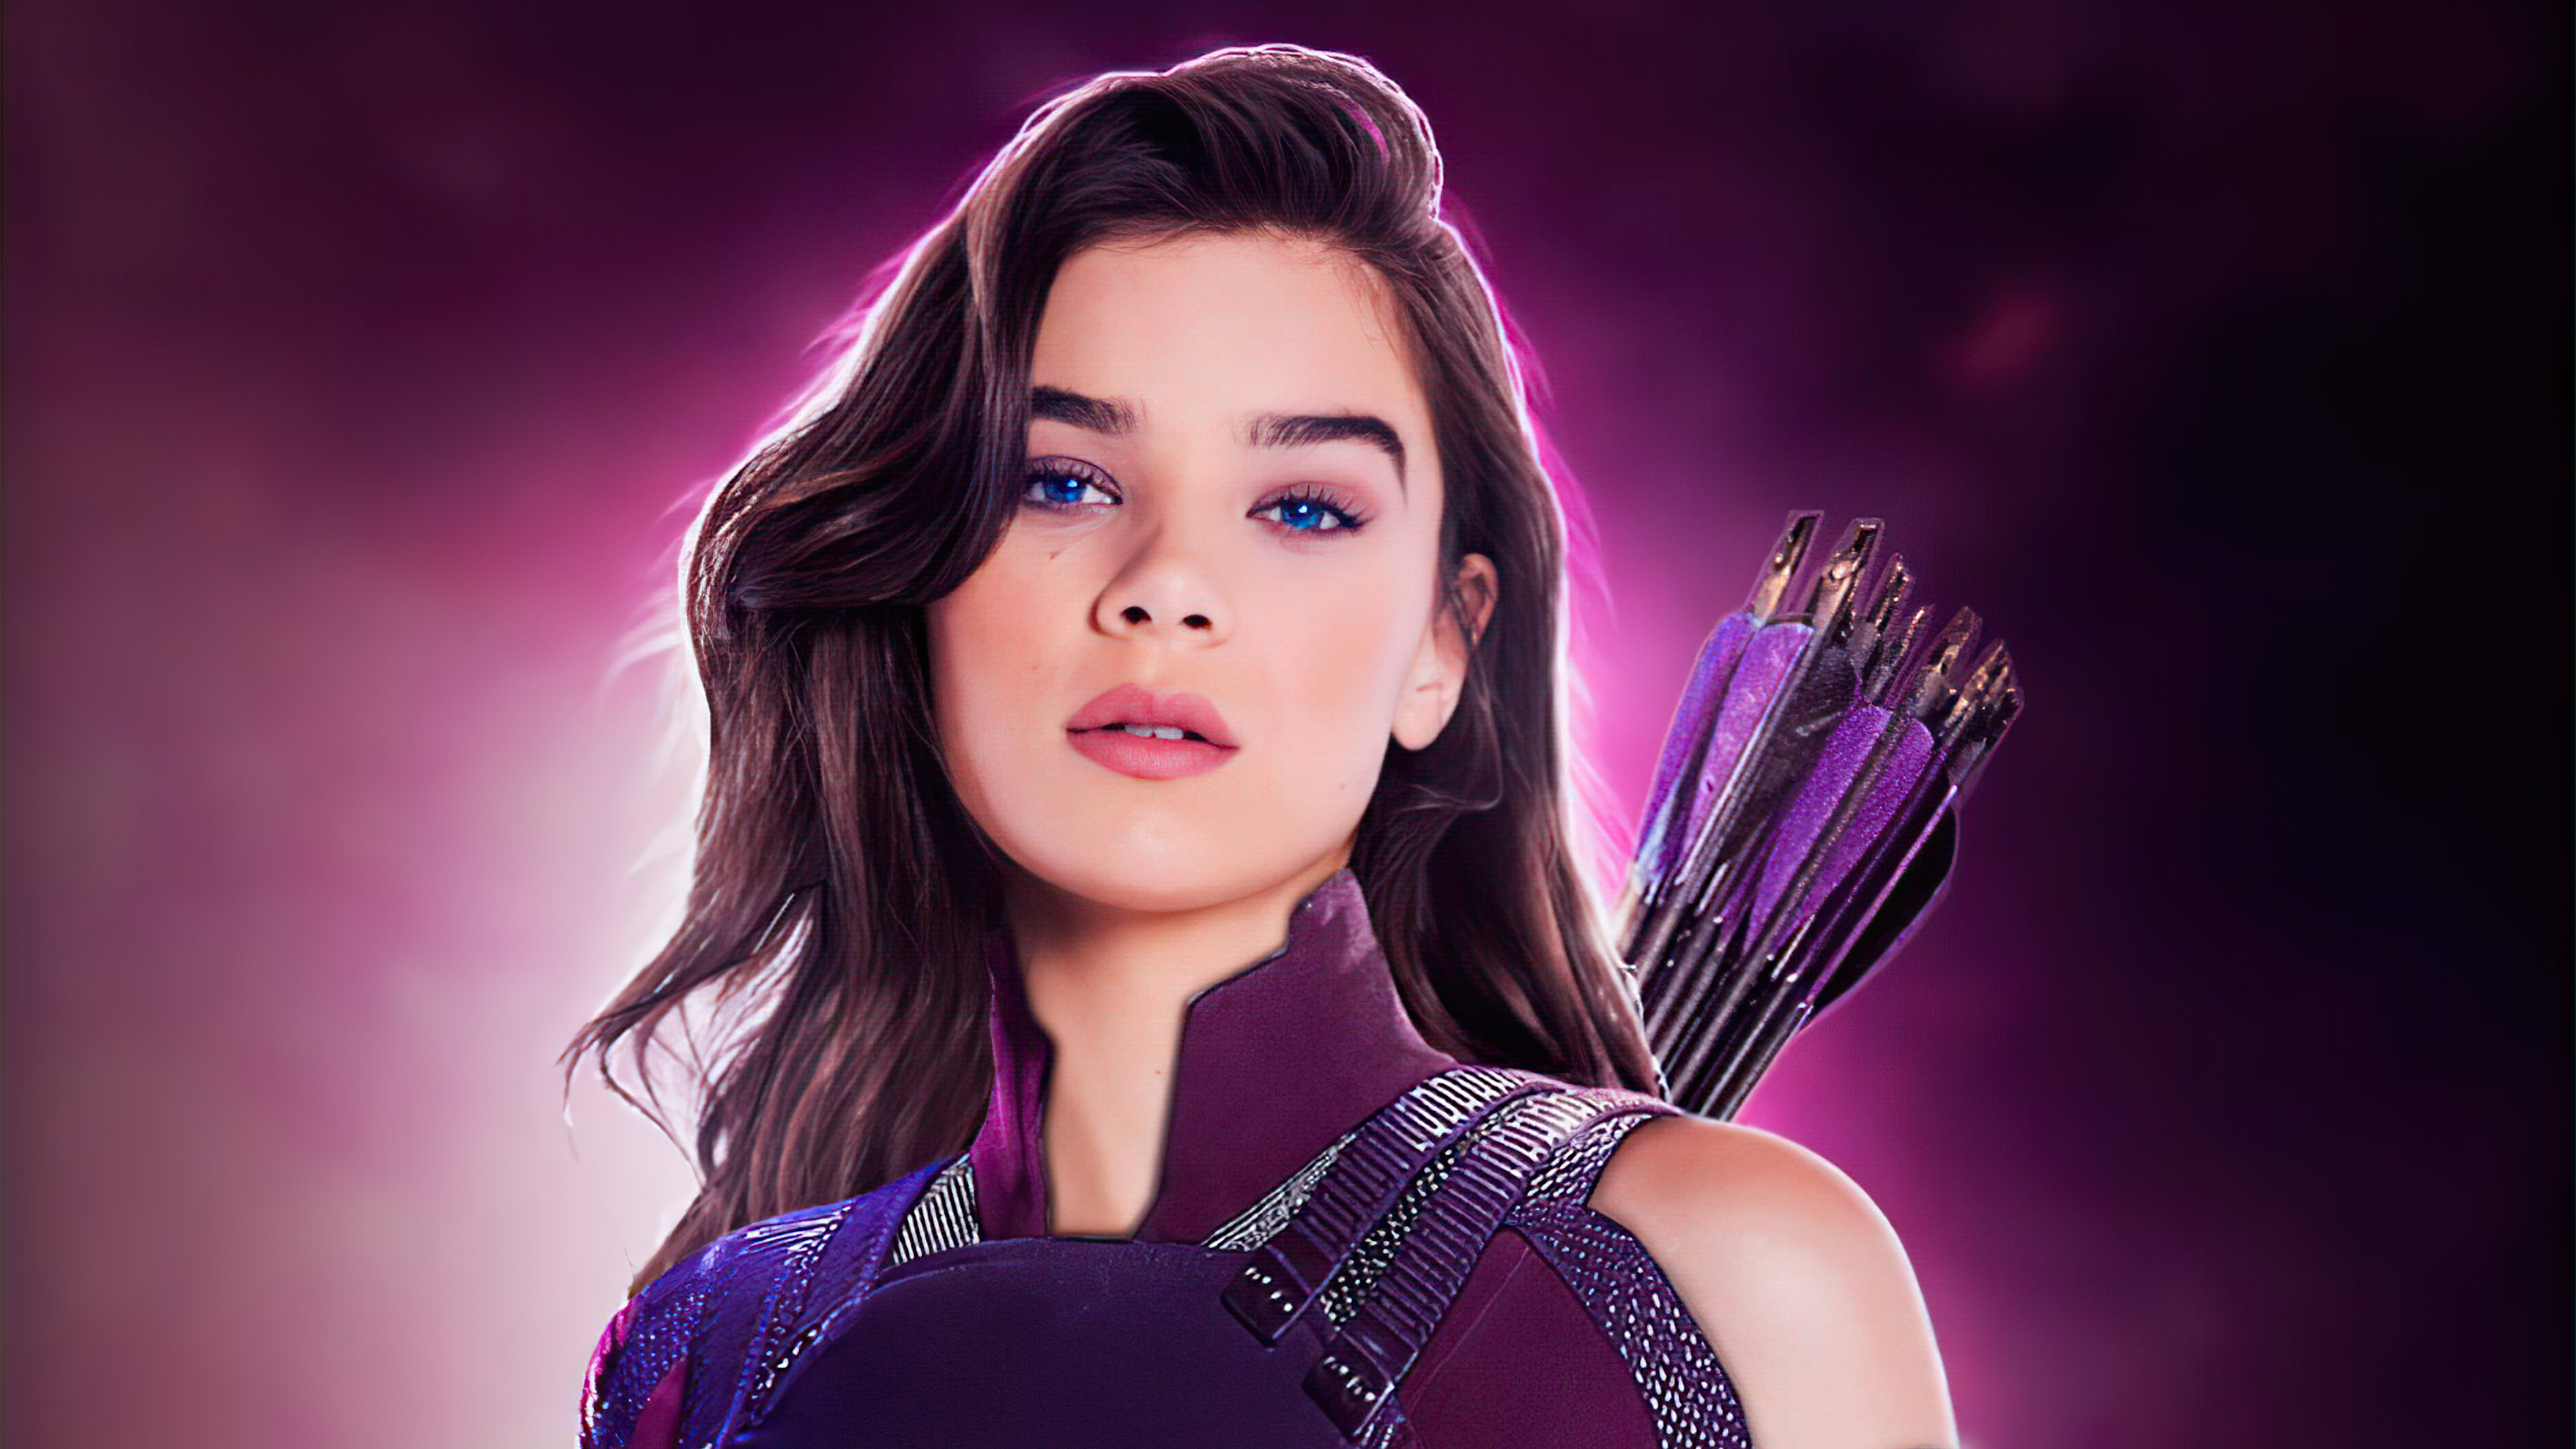 Tons of awesome Kate Bishop Hailee Steinfeld wallpapers to download for fre...